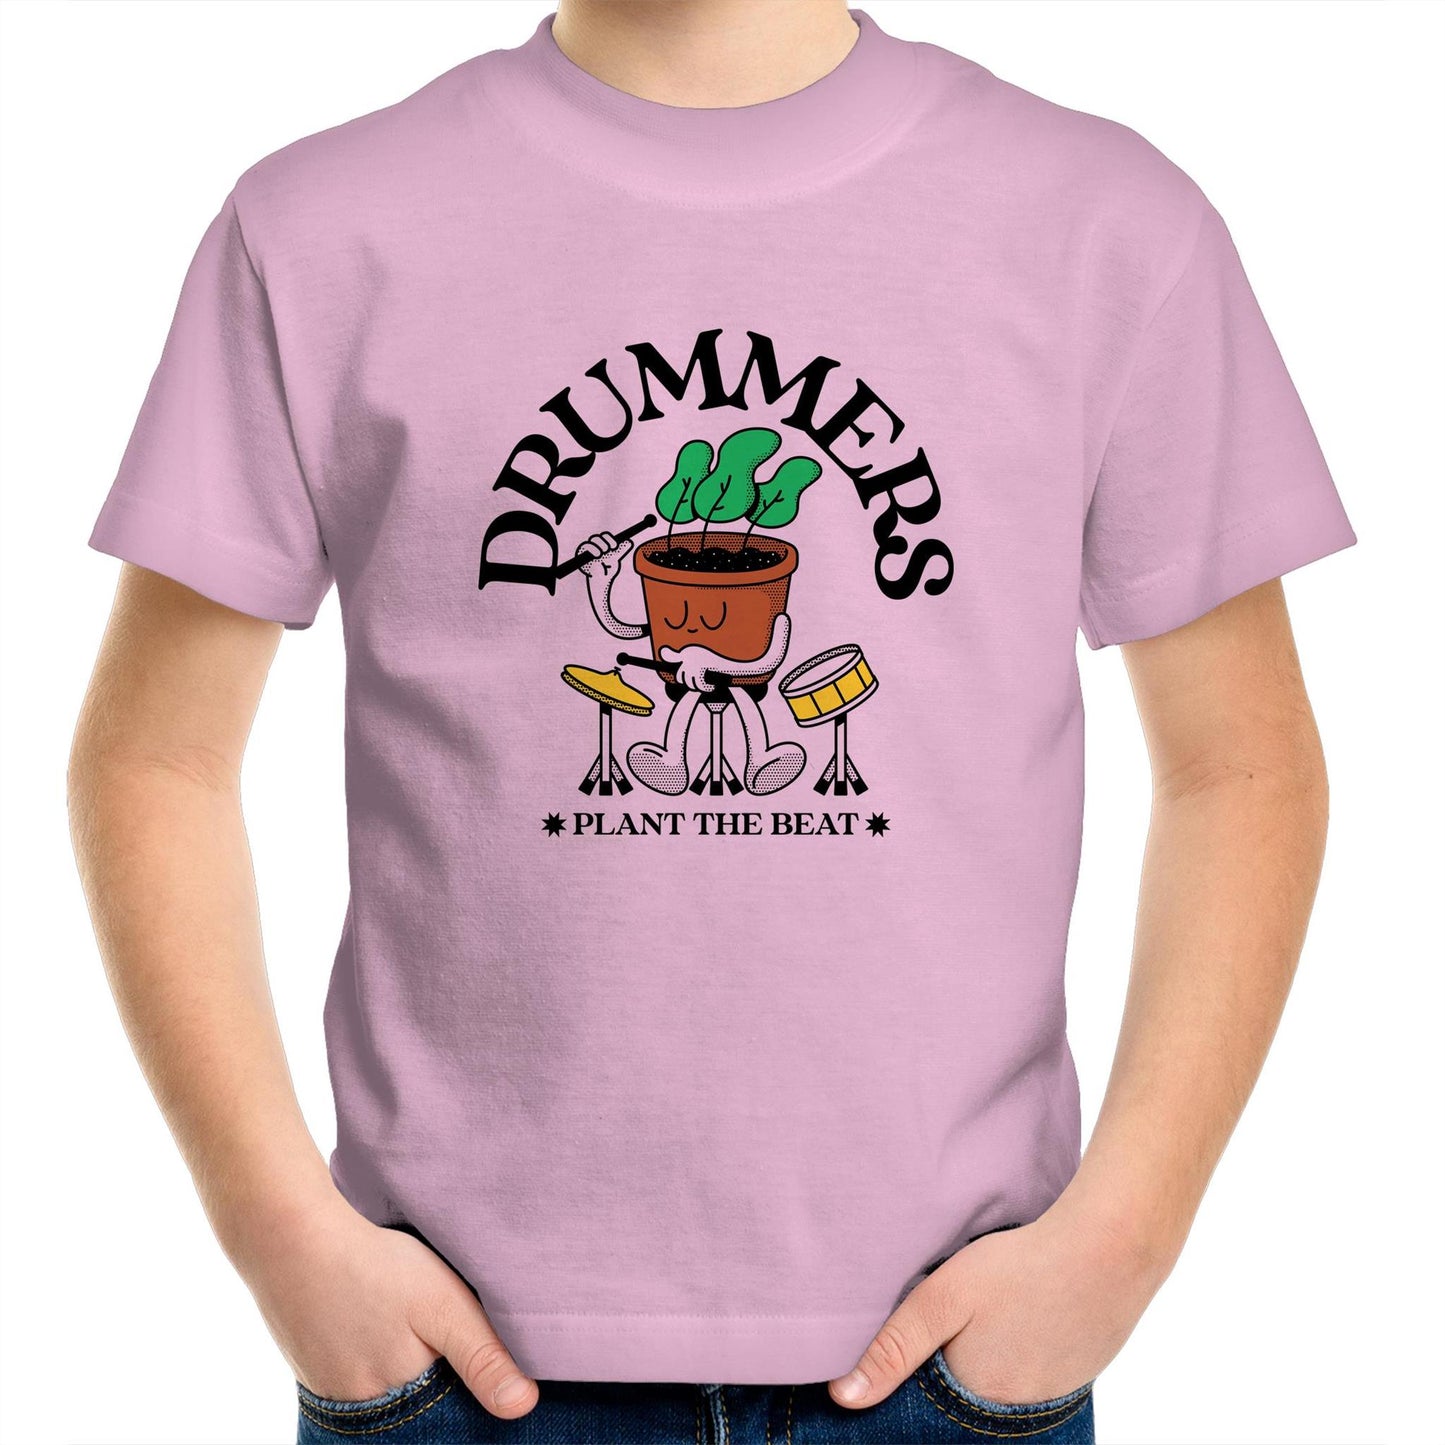 Drummers - Kids Youth Crew T-Shirt Pink Kids Youth T-shirt Music Plants